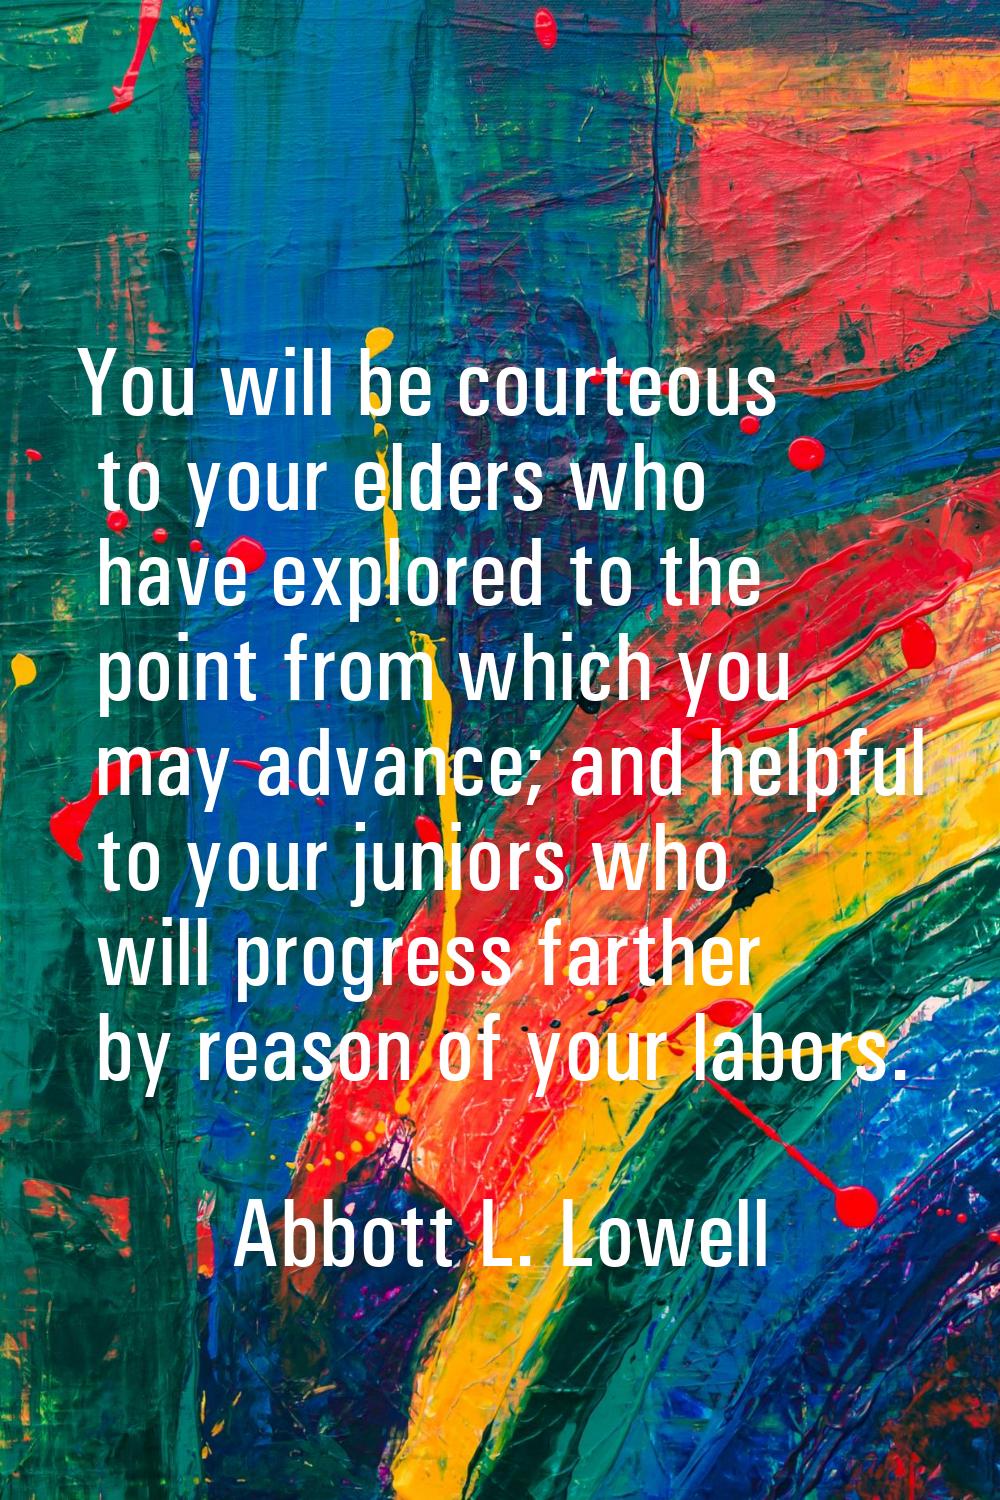 You will be courteous to your elders who have explored to the point from which you may advance; and